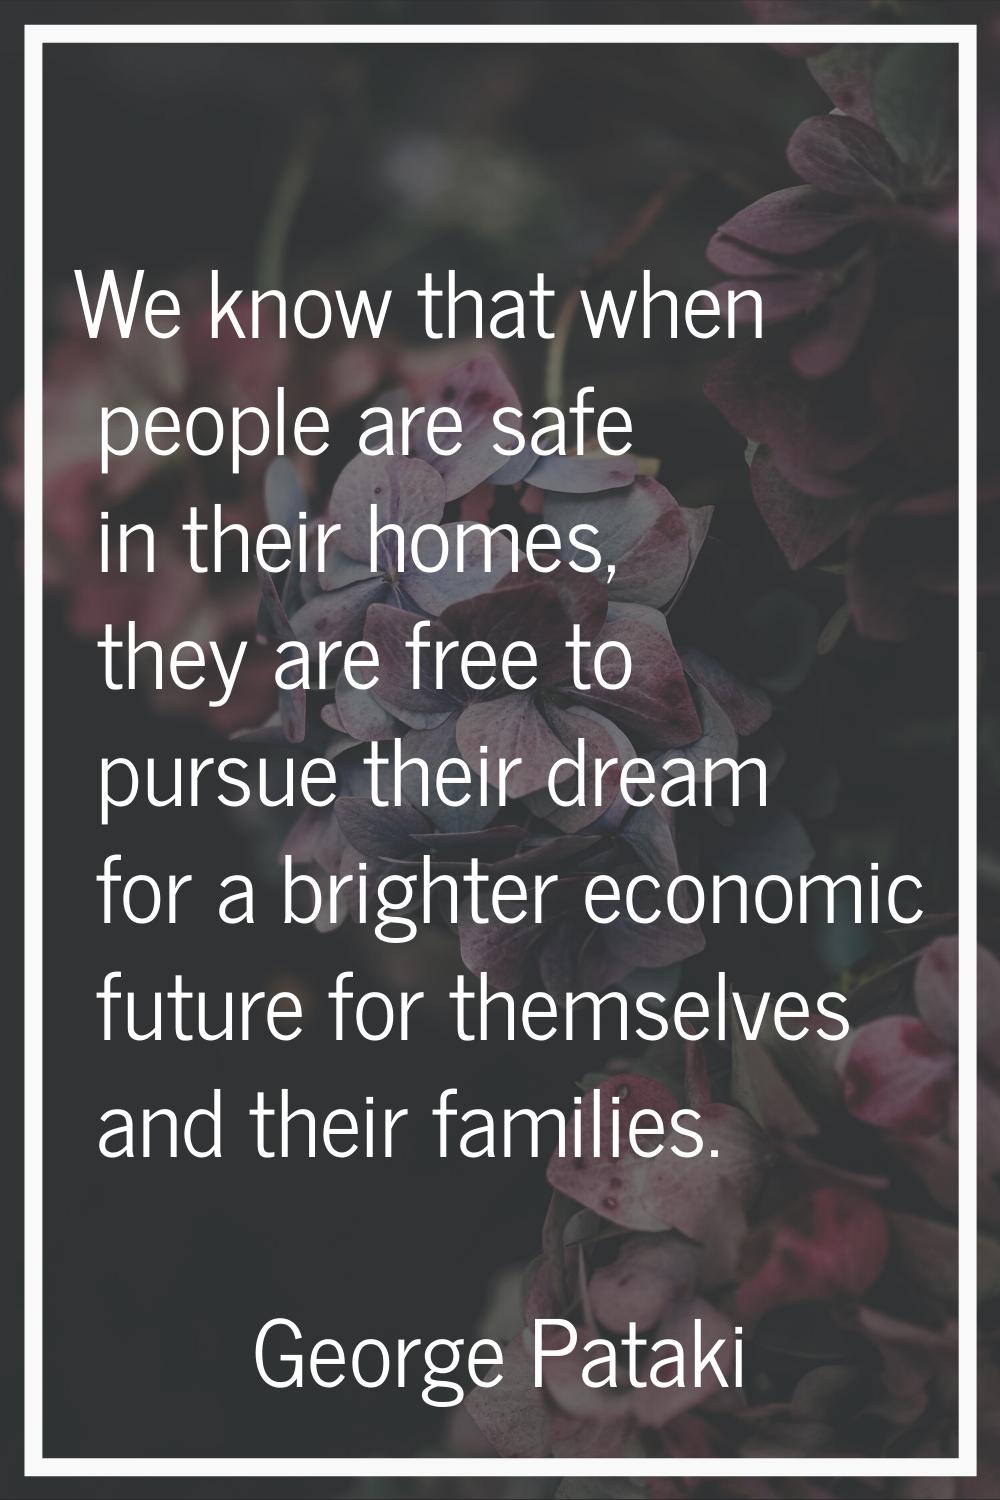 We know that when people are safe in their homes, they are free to pursue their dream for a brighte